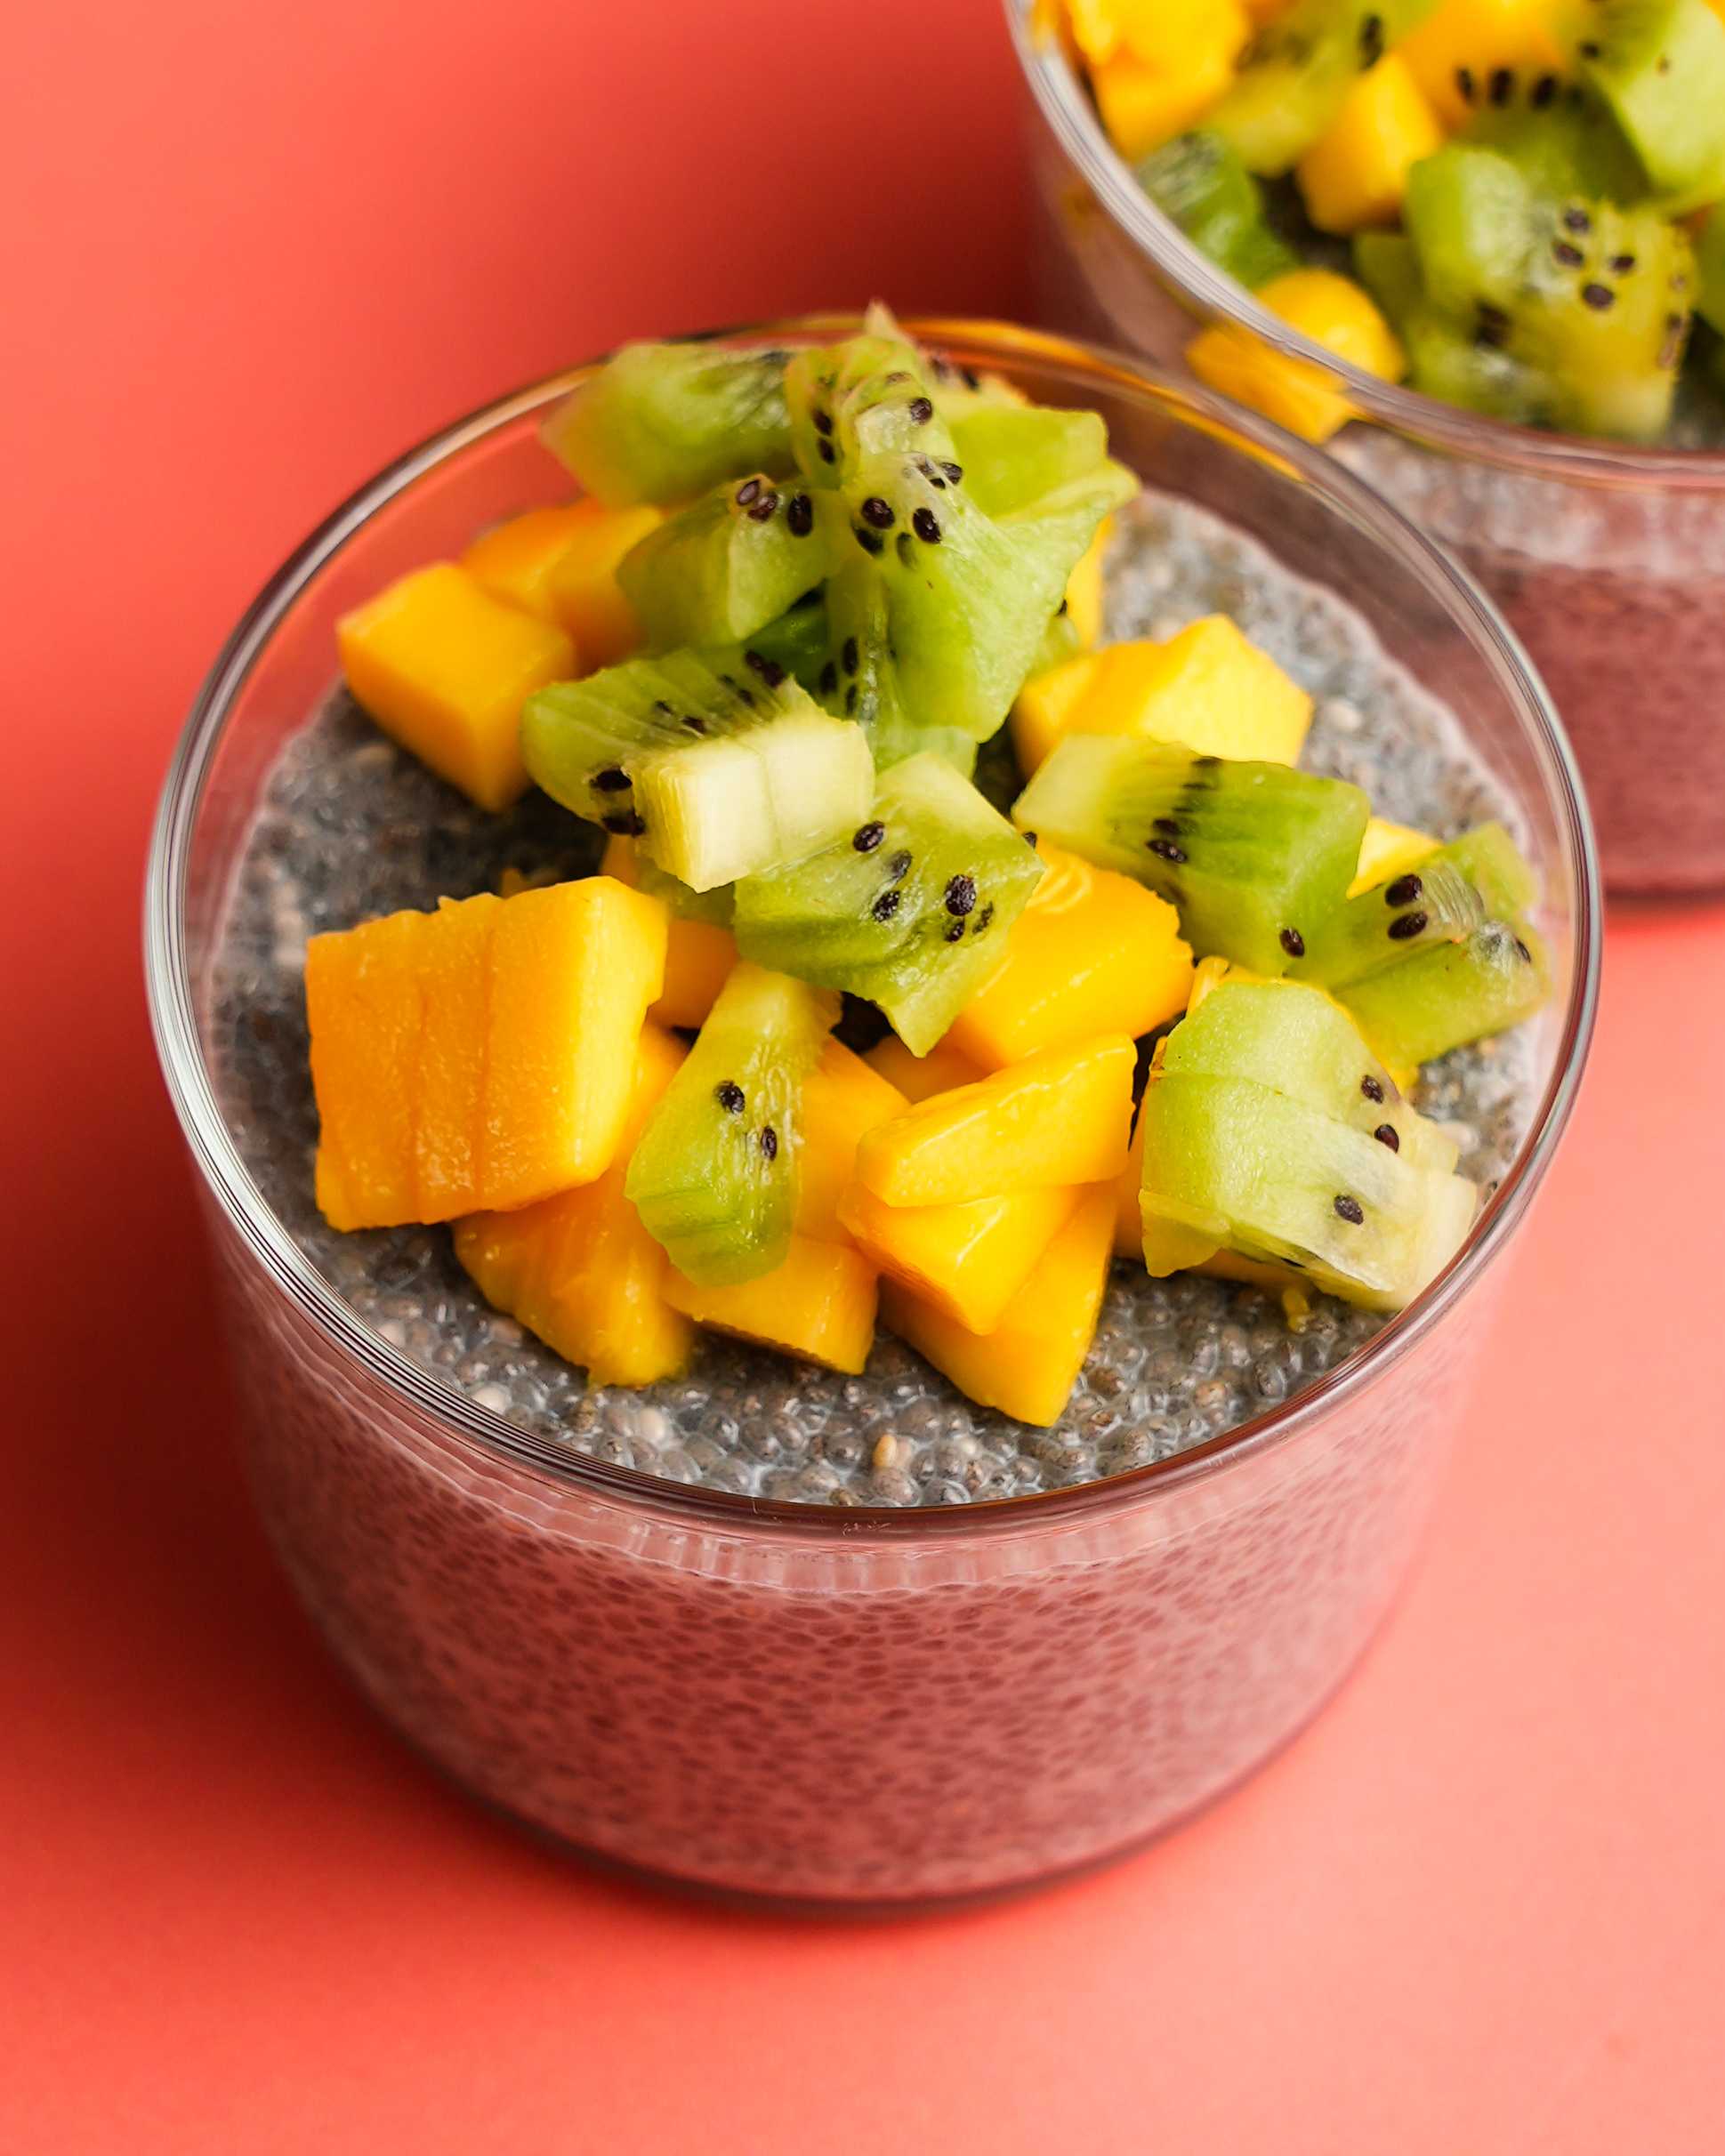 Two chia seed puddings with mango and kiwi on top sit in the front of the image, with Califia Farms Unsweetened Almondmilk off to the side.